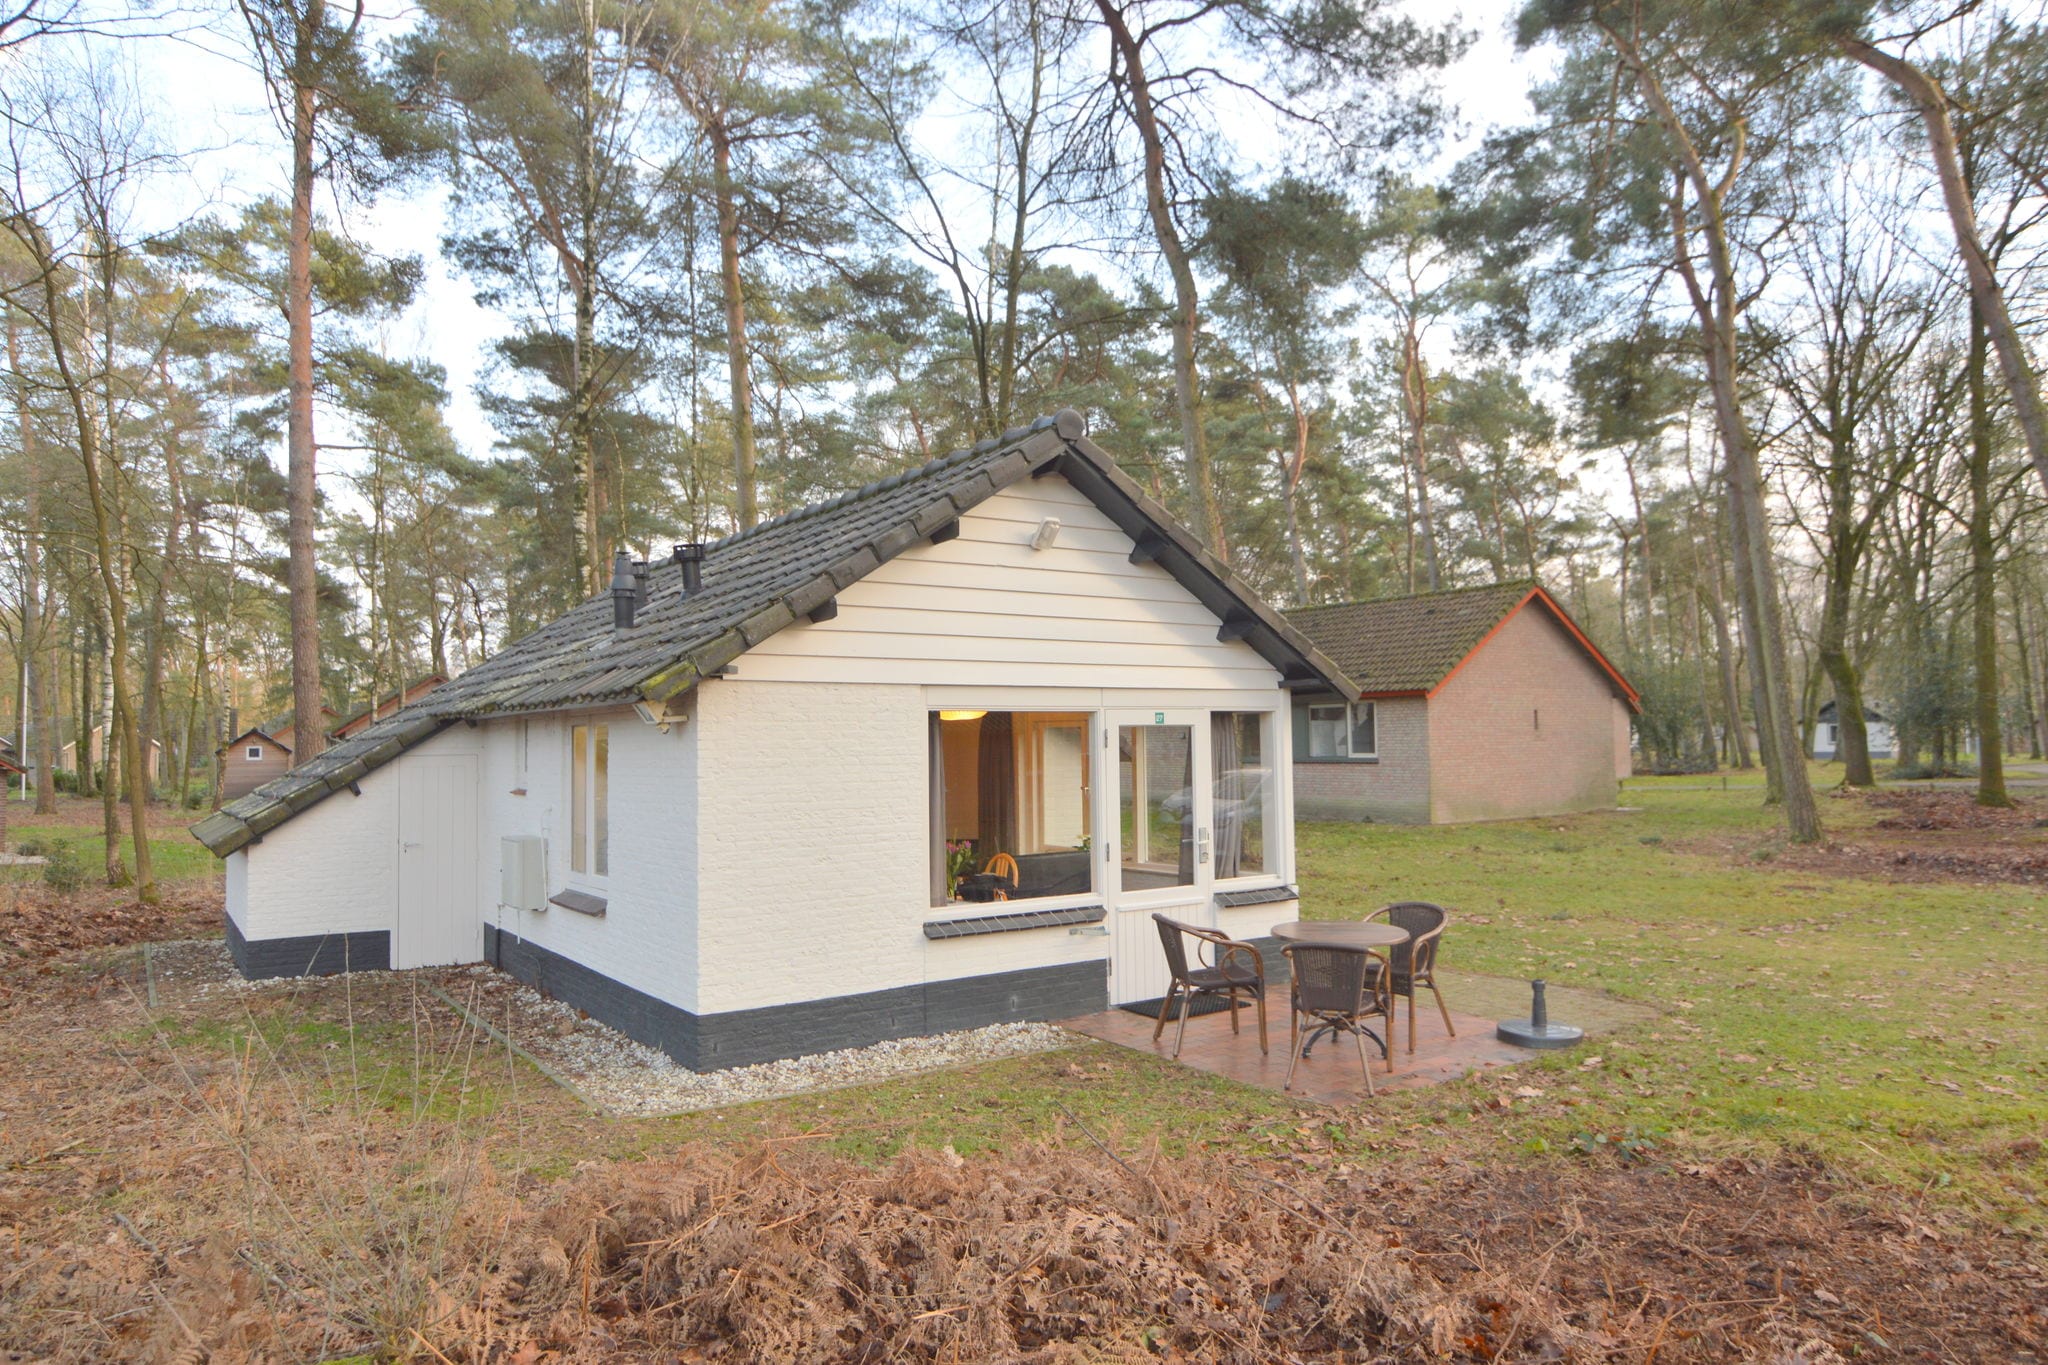 detached bungalow in a nature-filled park